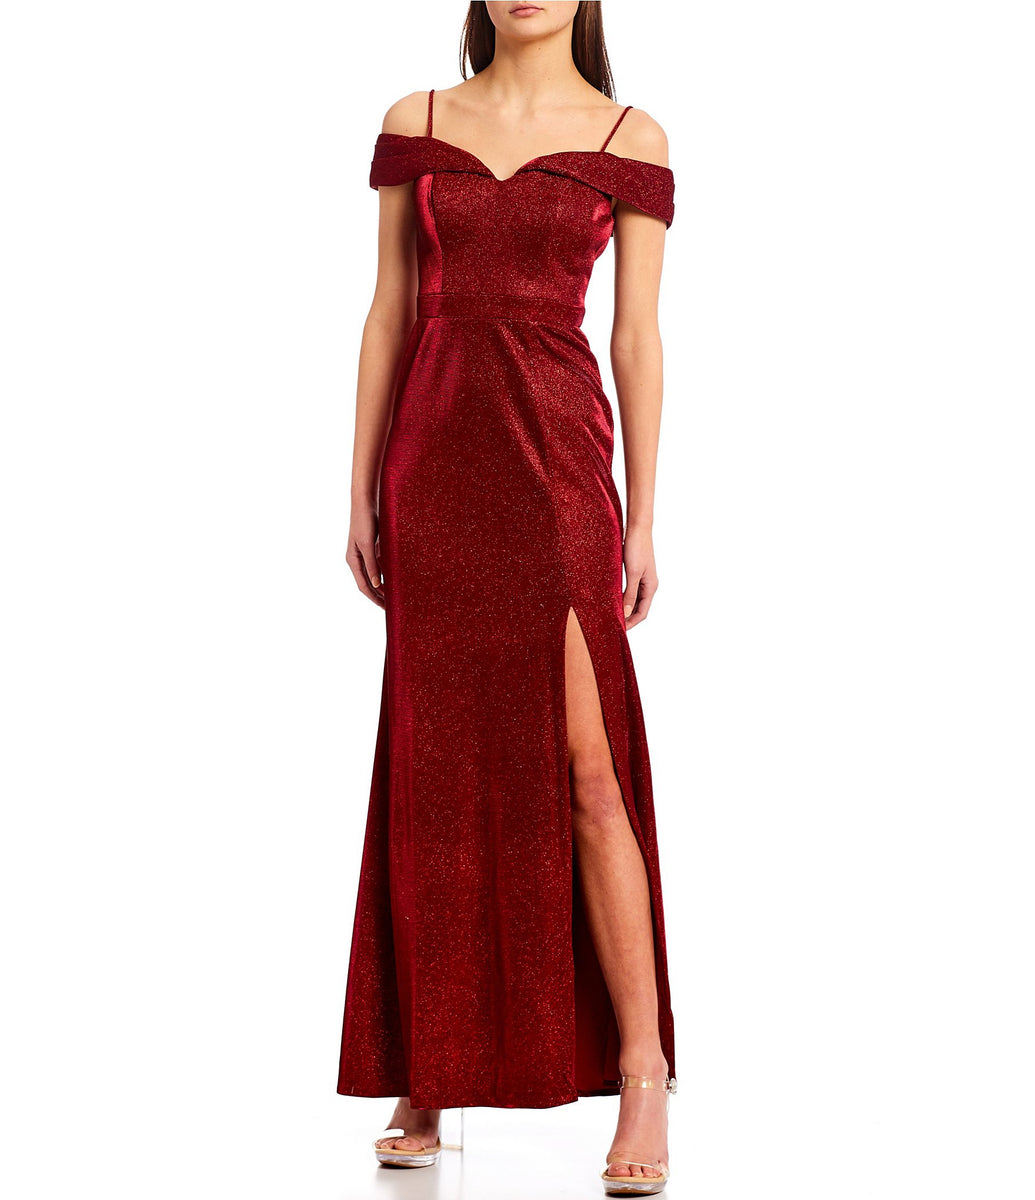 & co red glitter cold gown – The SheShop (Birmingham)